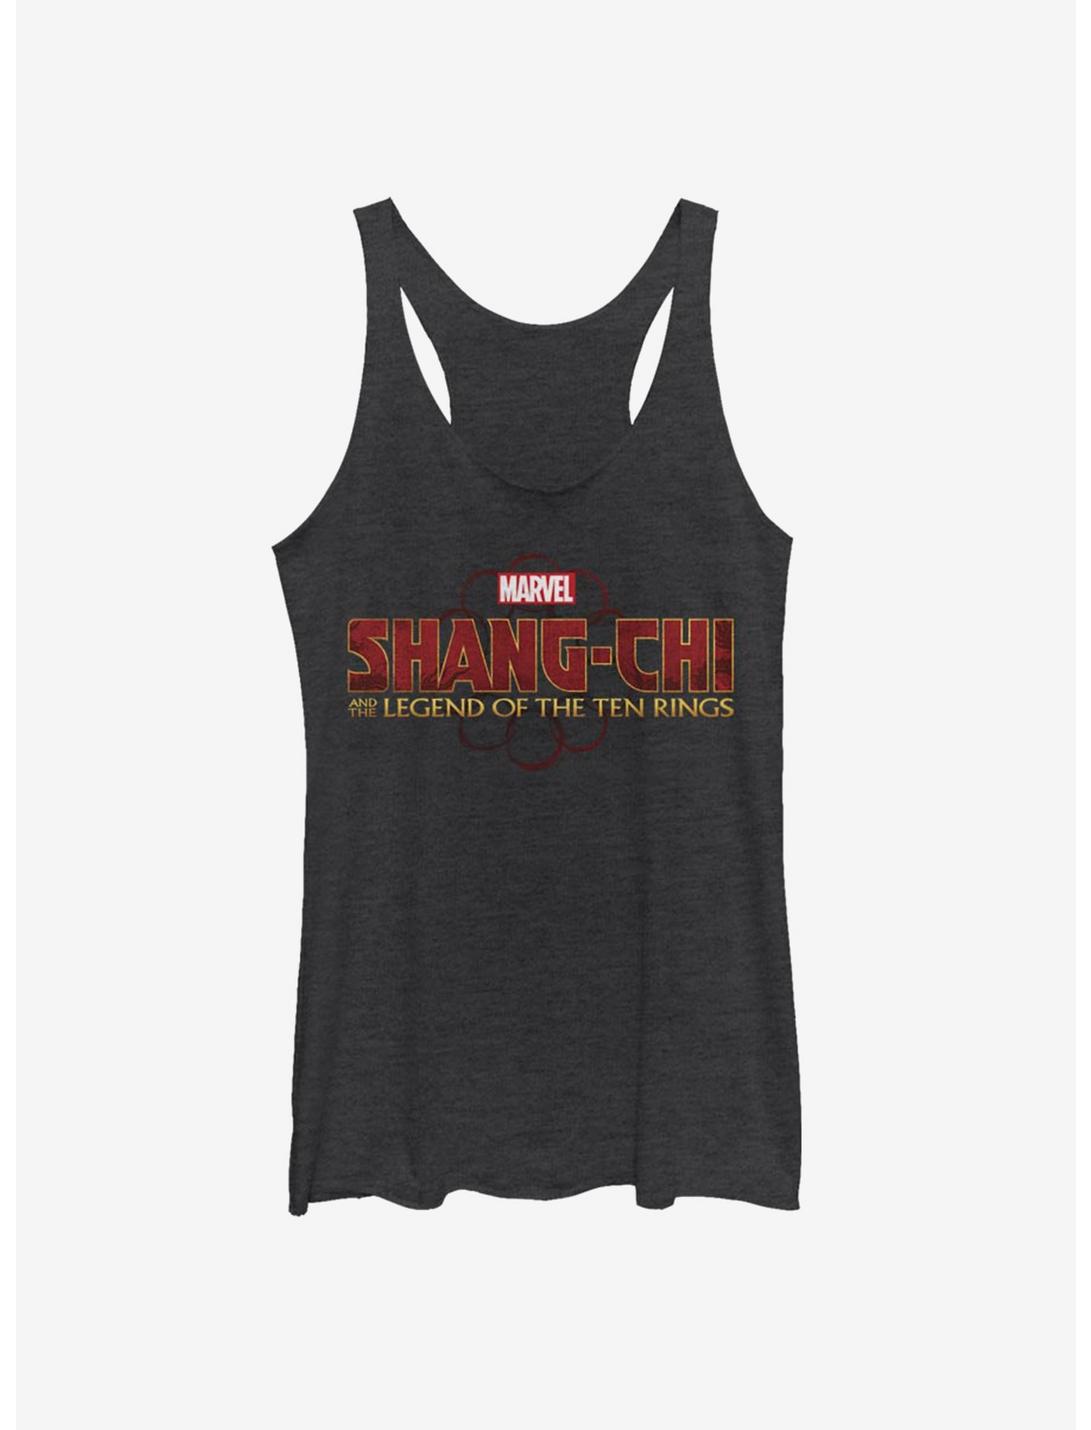 Marvel Shang-Chi And The Legend Of The Ten Rings Womens Tank Top, BLK HTR, hi-res